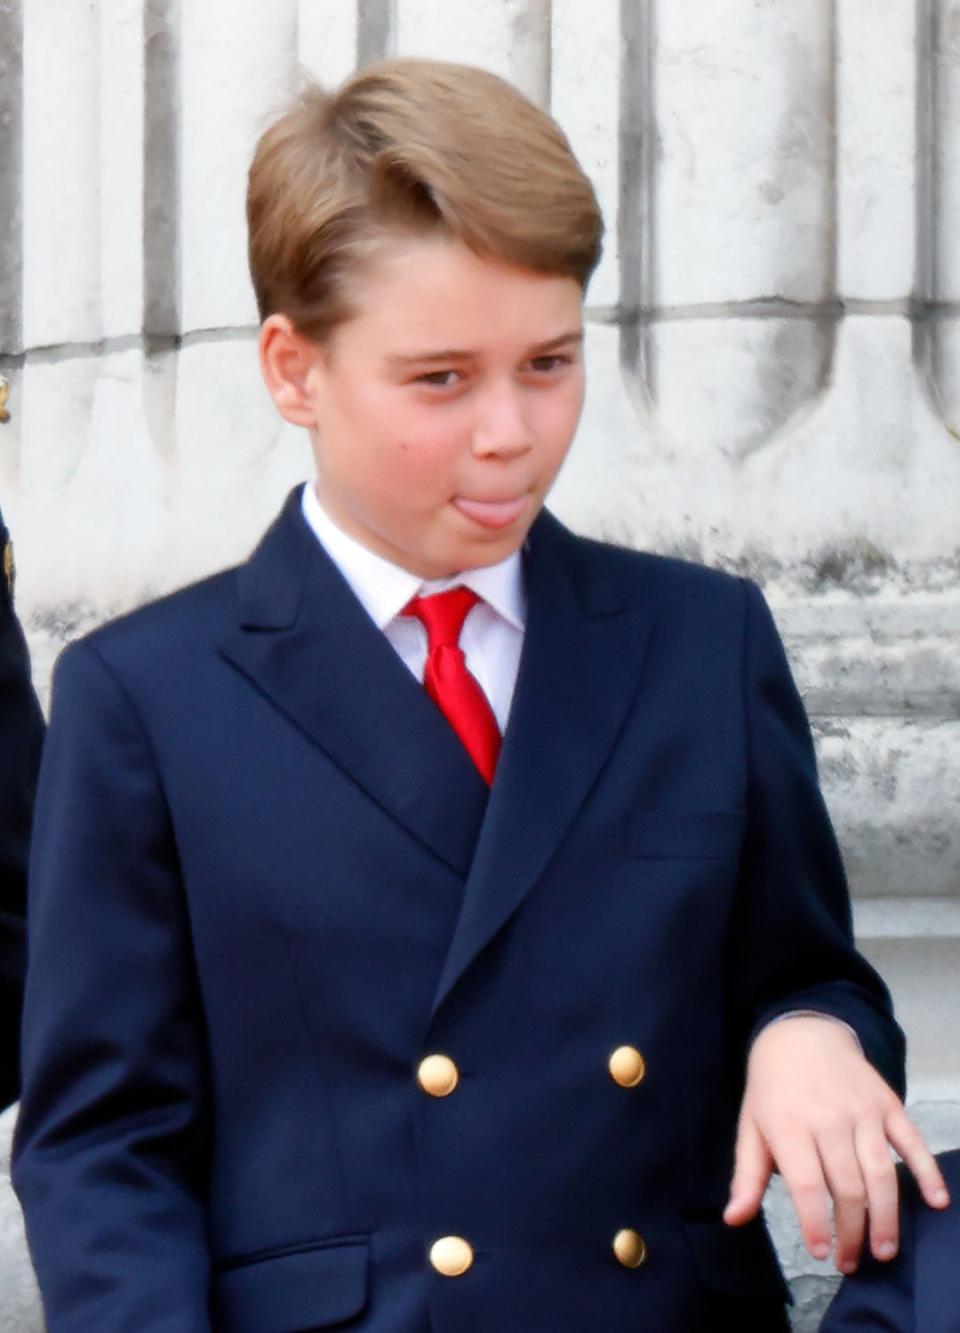 Prince George sticks his tongue out